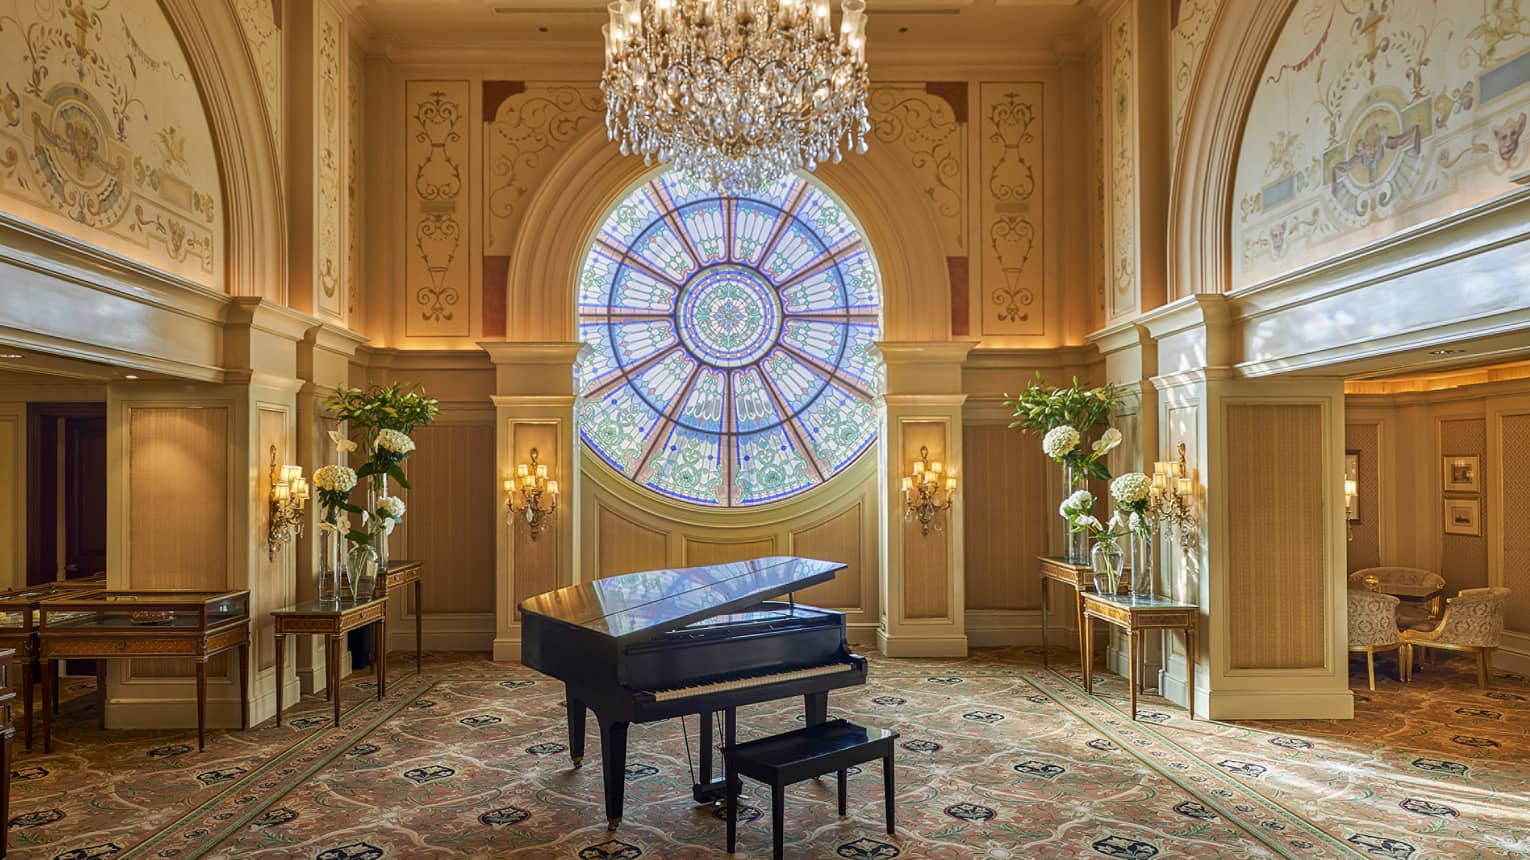 Piano in the Tea Lounge with stained-glass window, the Ocular, in background